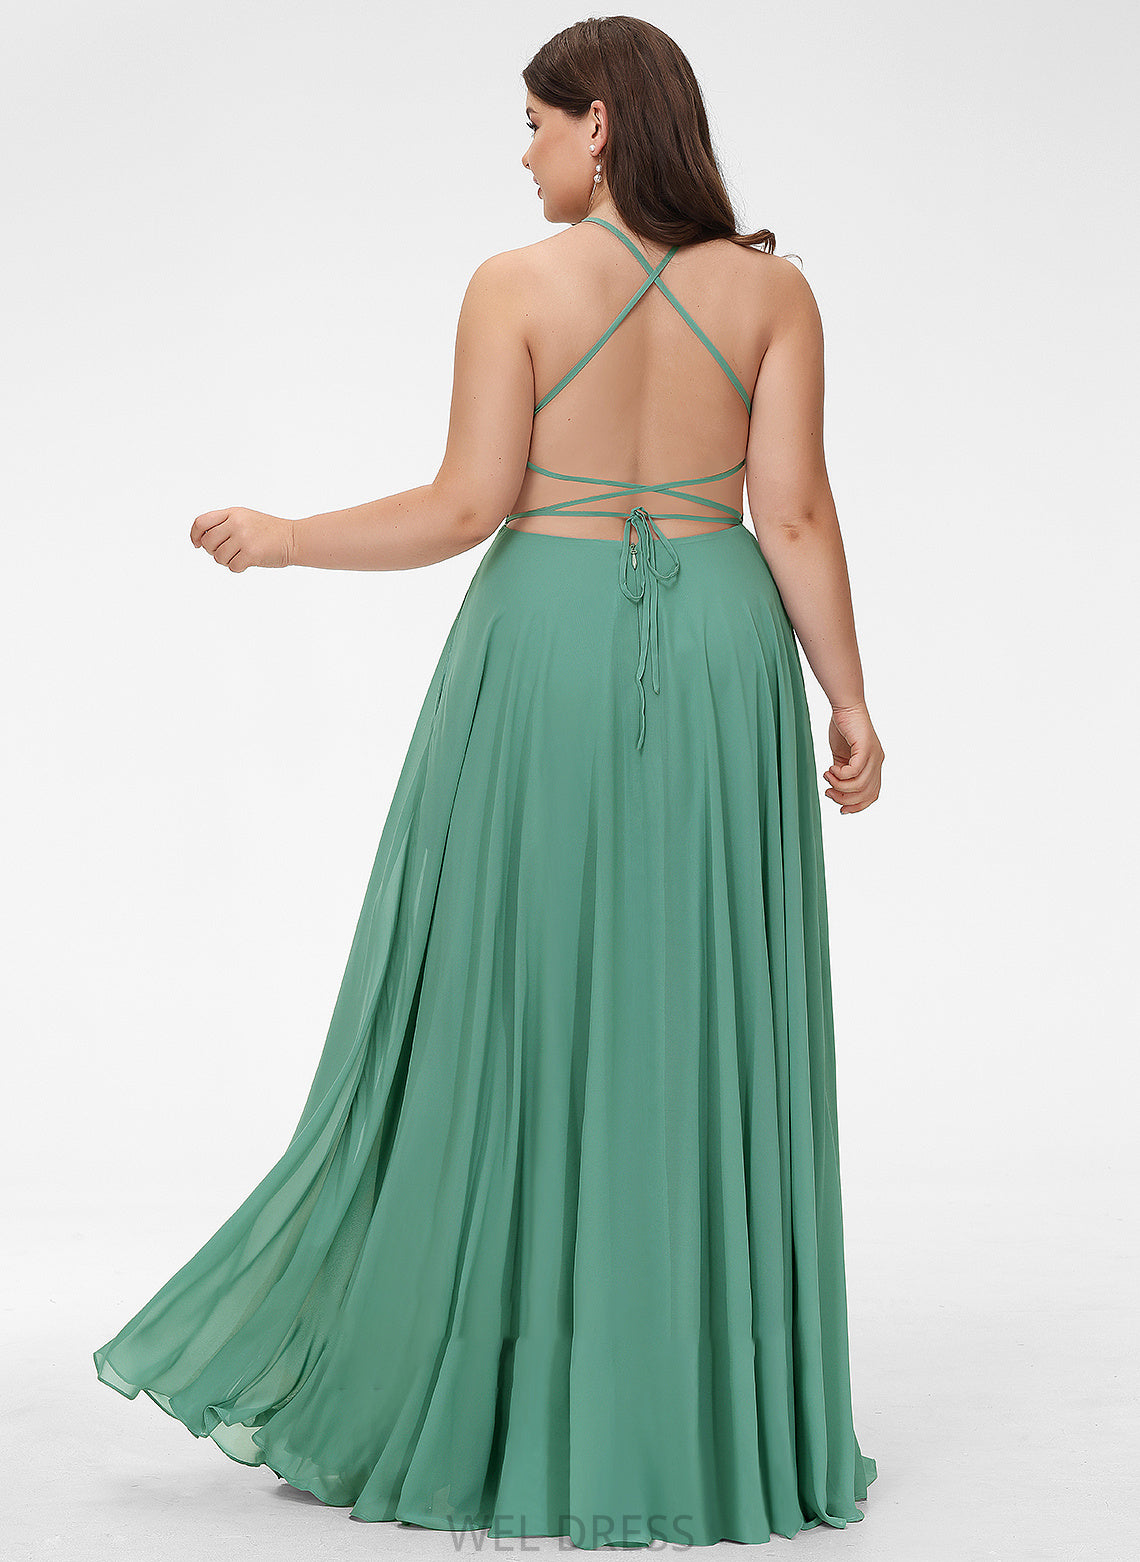 Pockets Prom Dresses Front Split Floor-Length Chiffon Square With Neckline A-Line Angeline